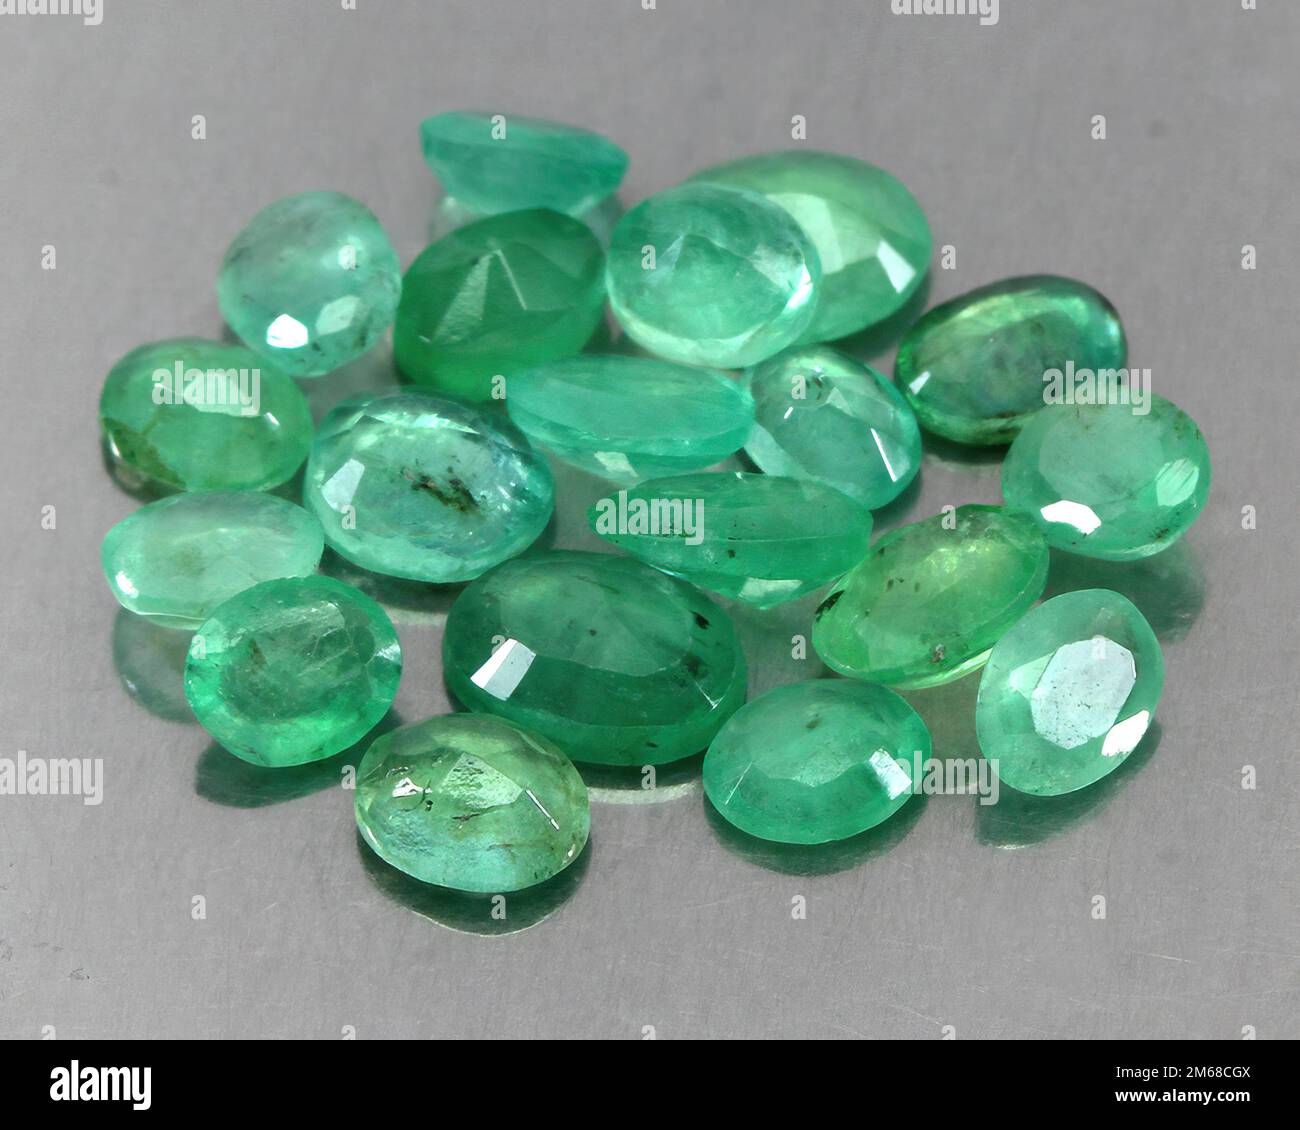 Natural stone green emerald on a gray background Stock Photo